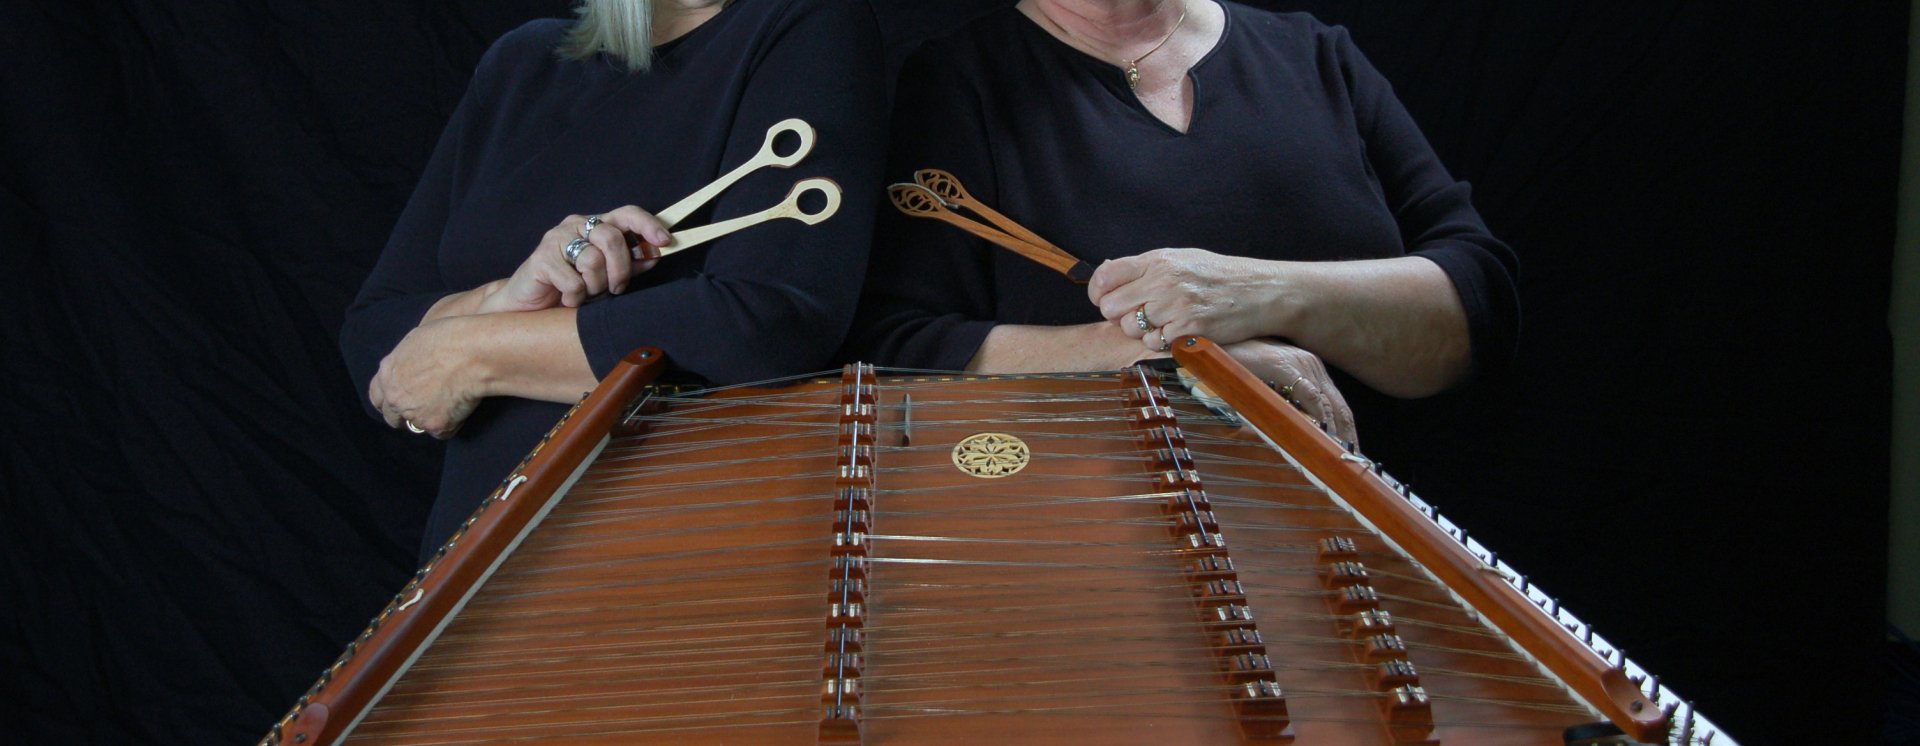 Gail and vikki with dulcimers 10 copy